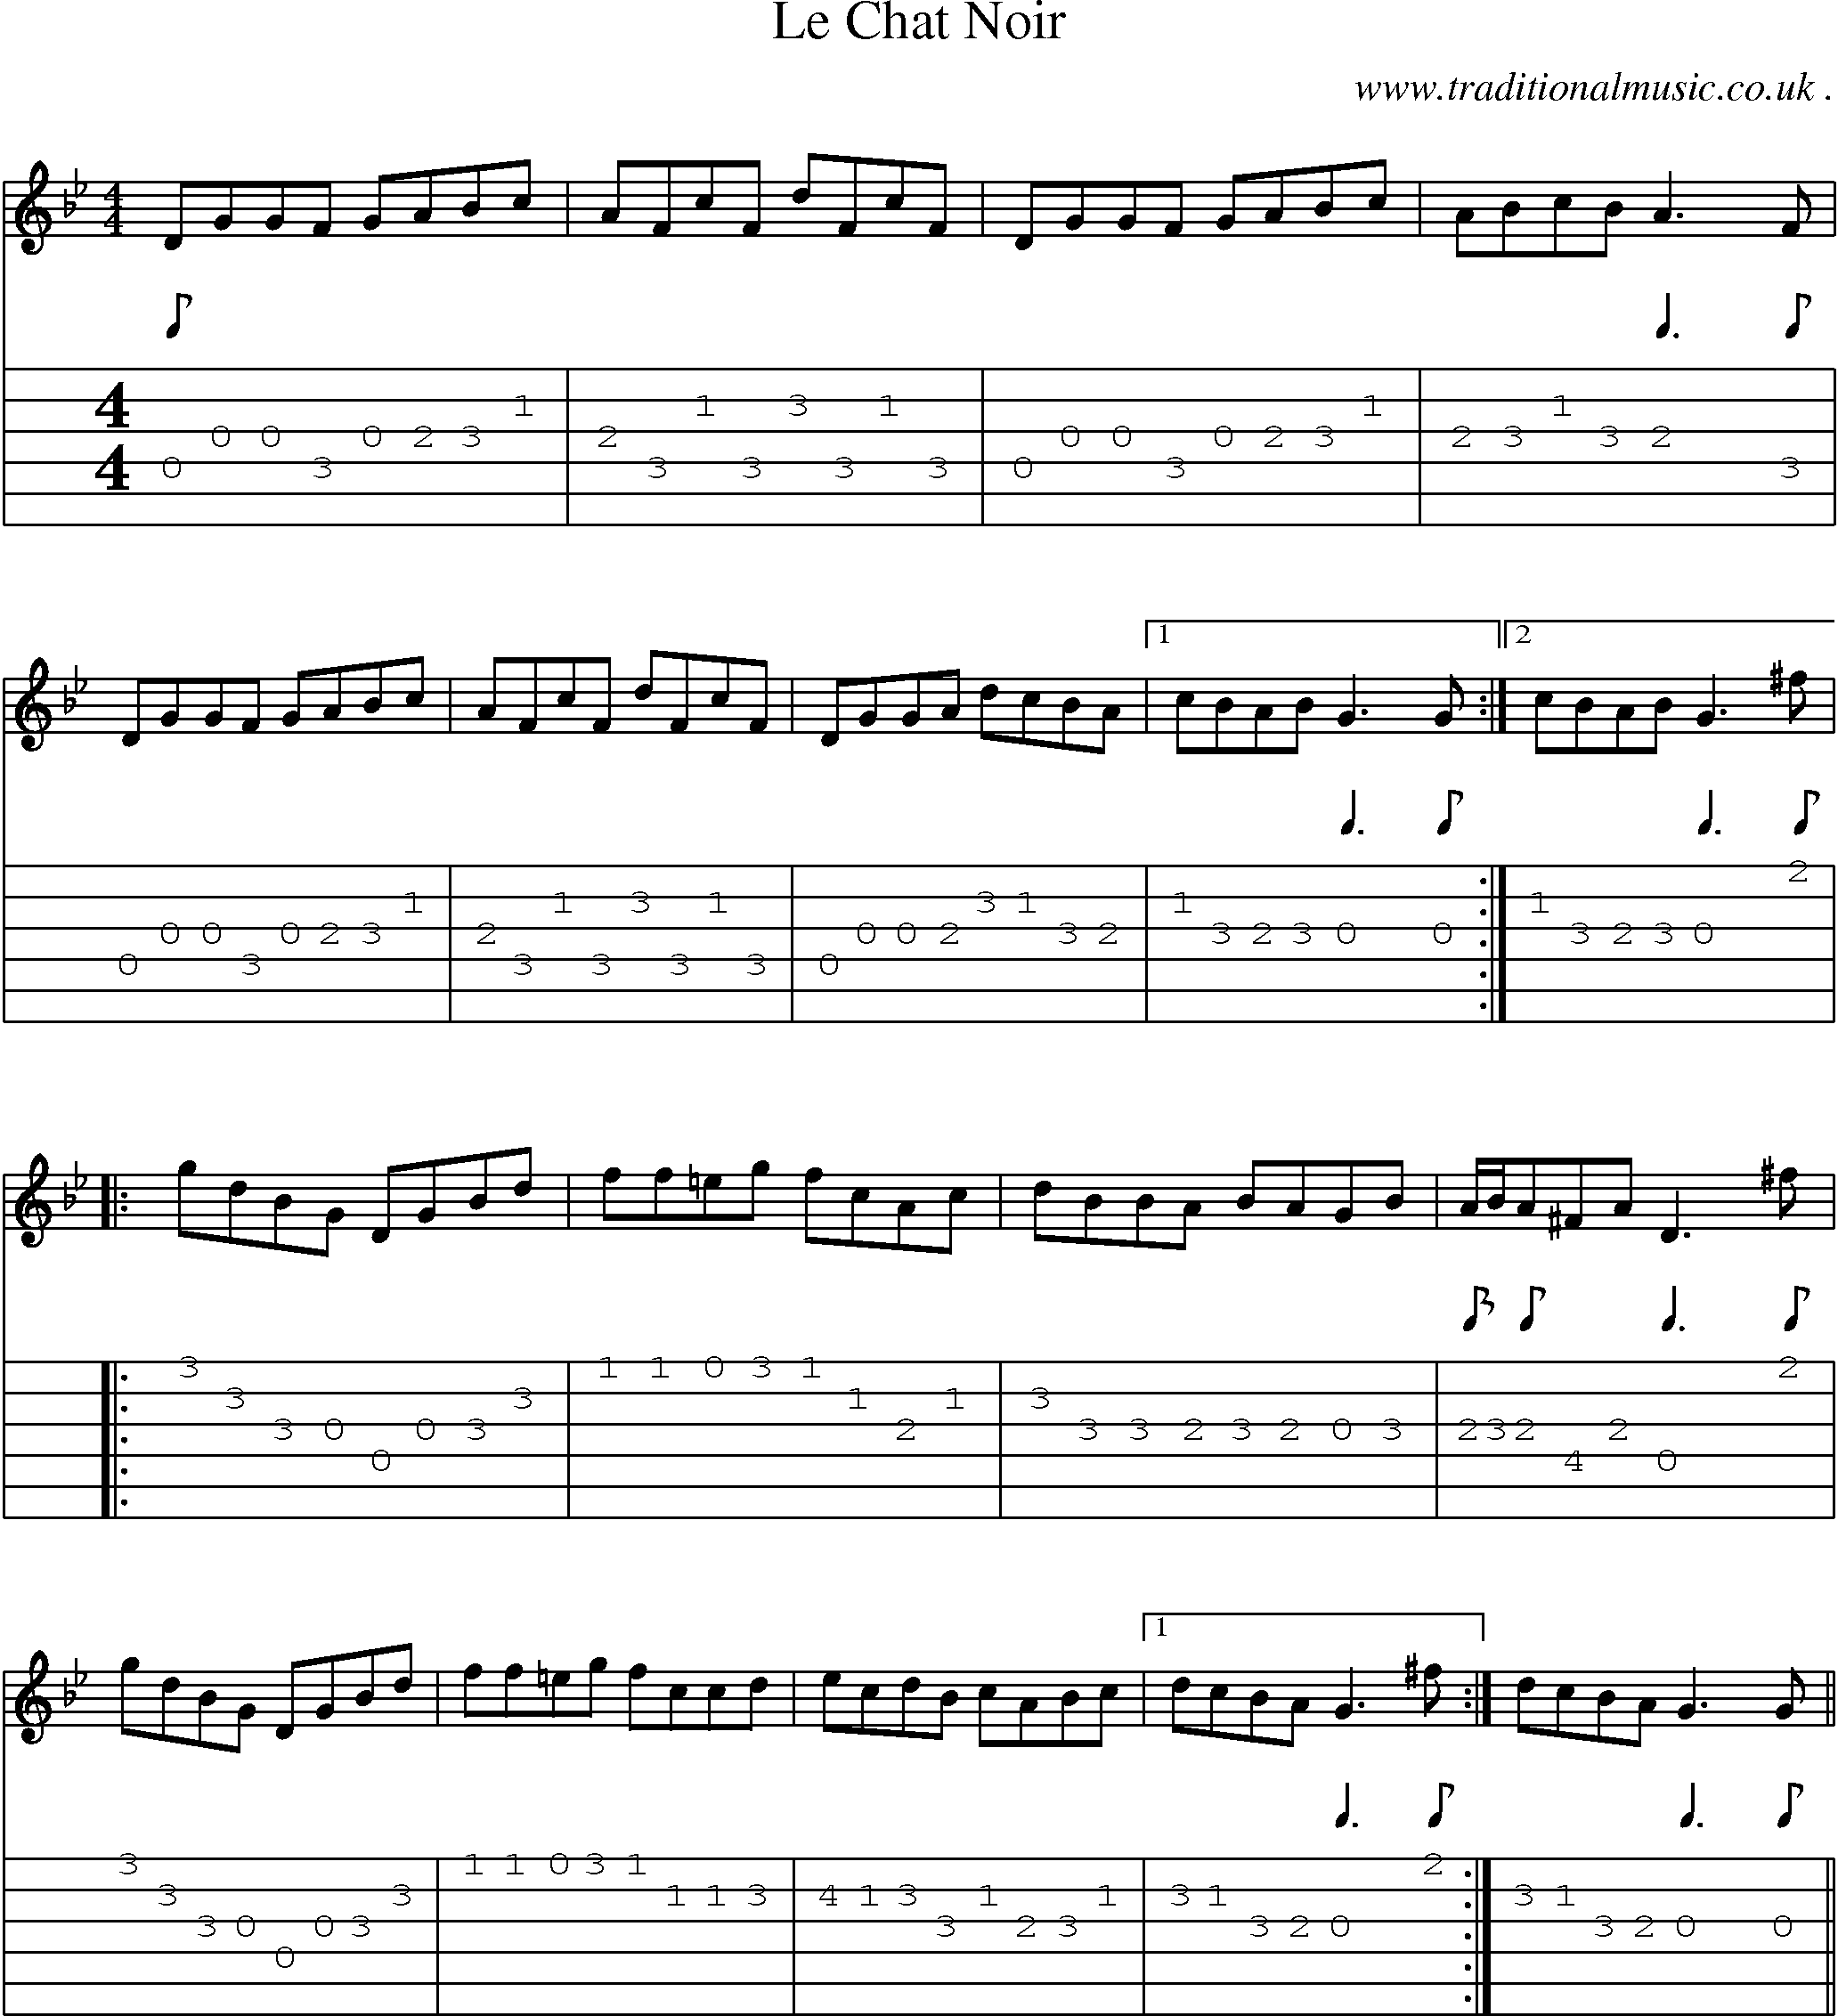 Sheet-Music and Guitar Tabs for Le Chat Noir